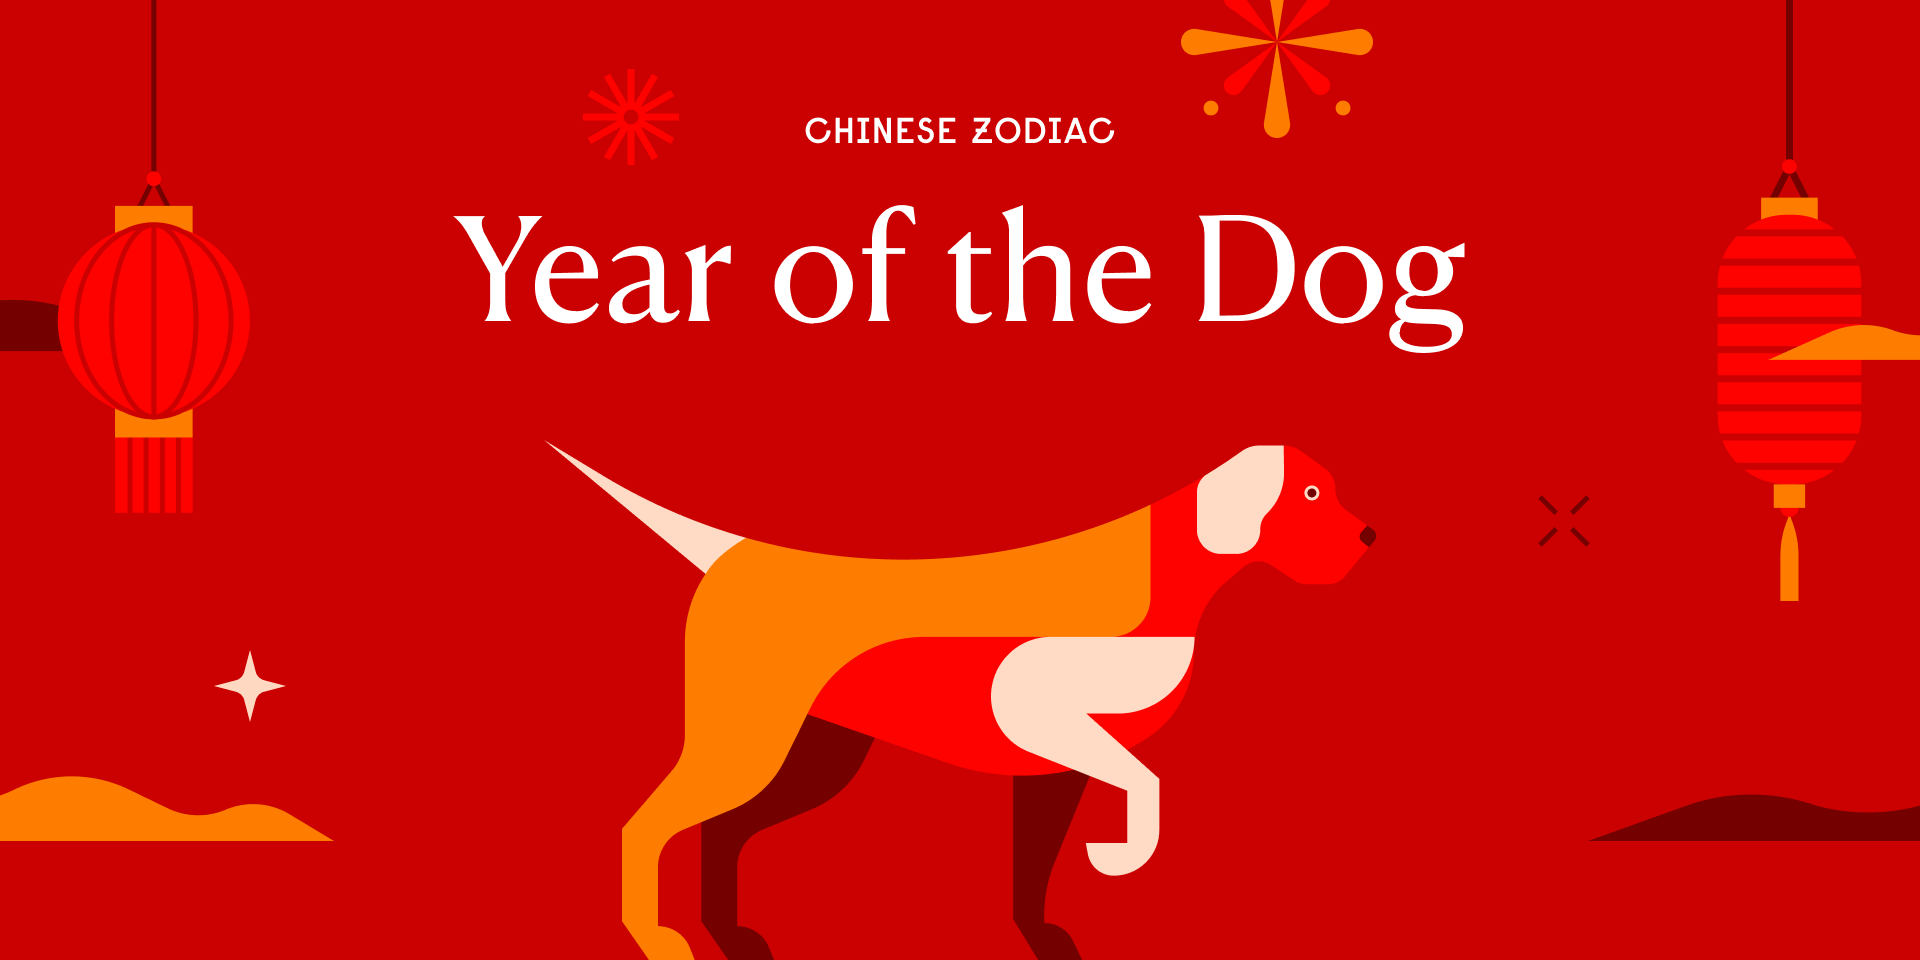 2624 2021 horoscope predictions for those born in the year of dog 1